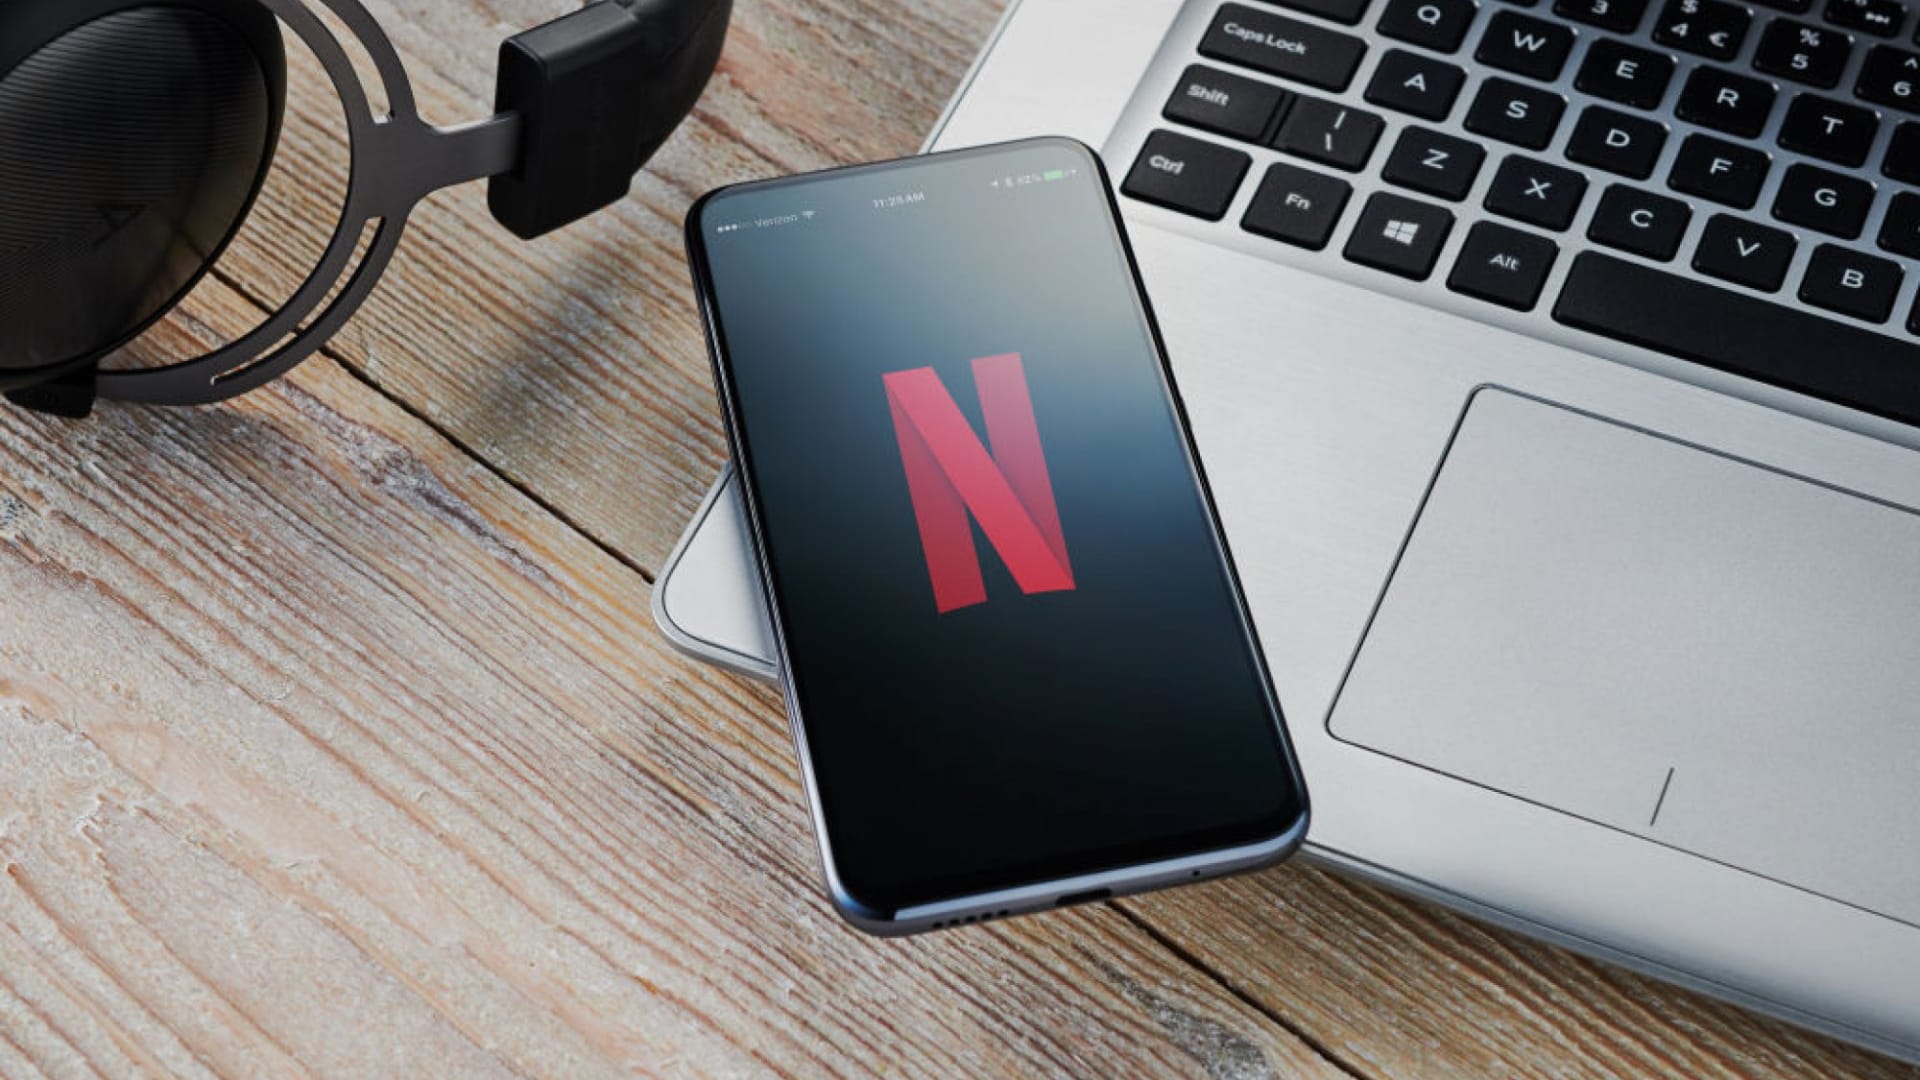 Netflix Made 9 Big Changes, and Most Subscribers Now Have No Idea